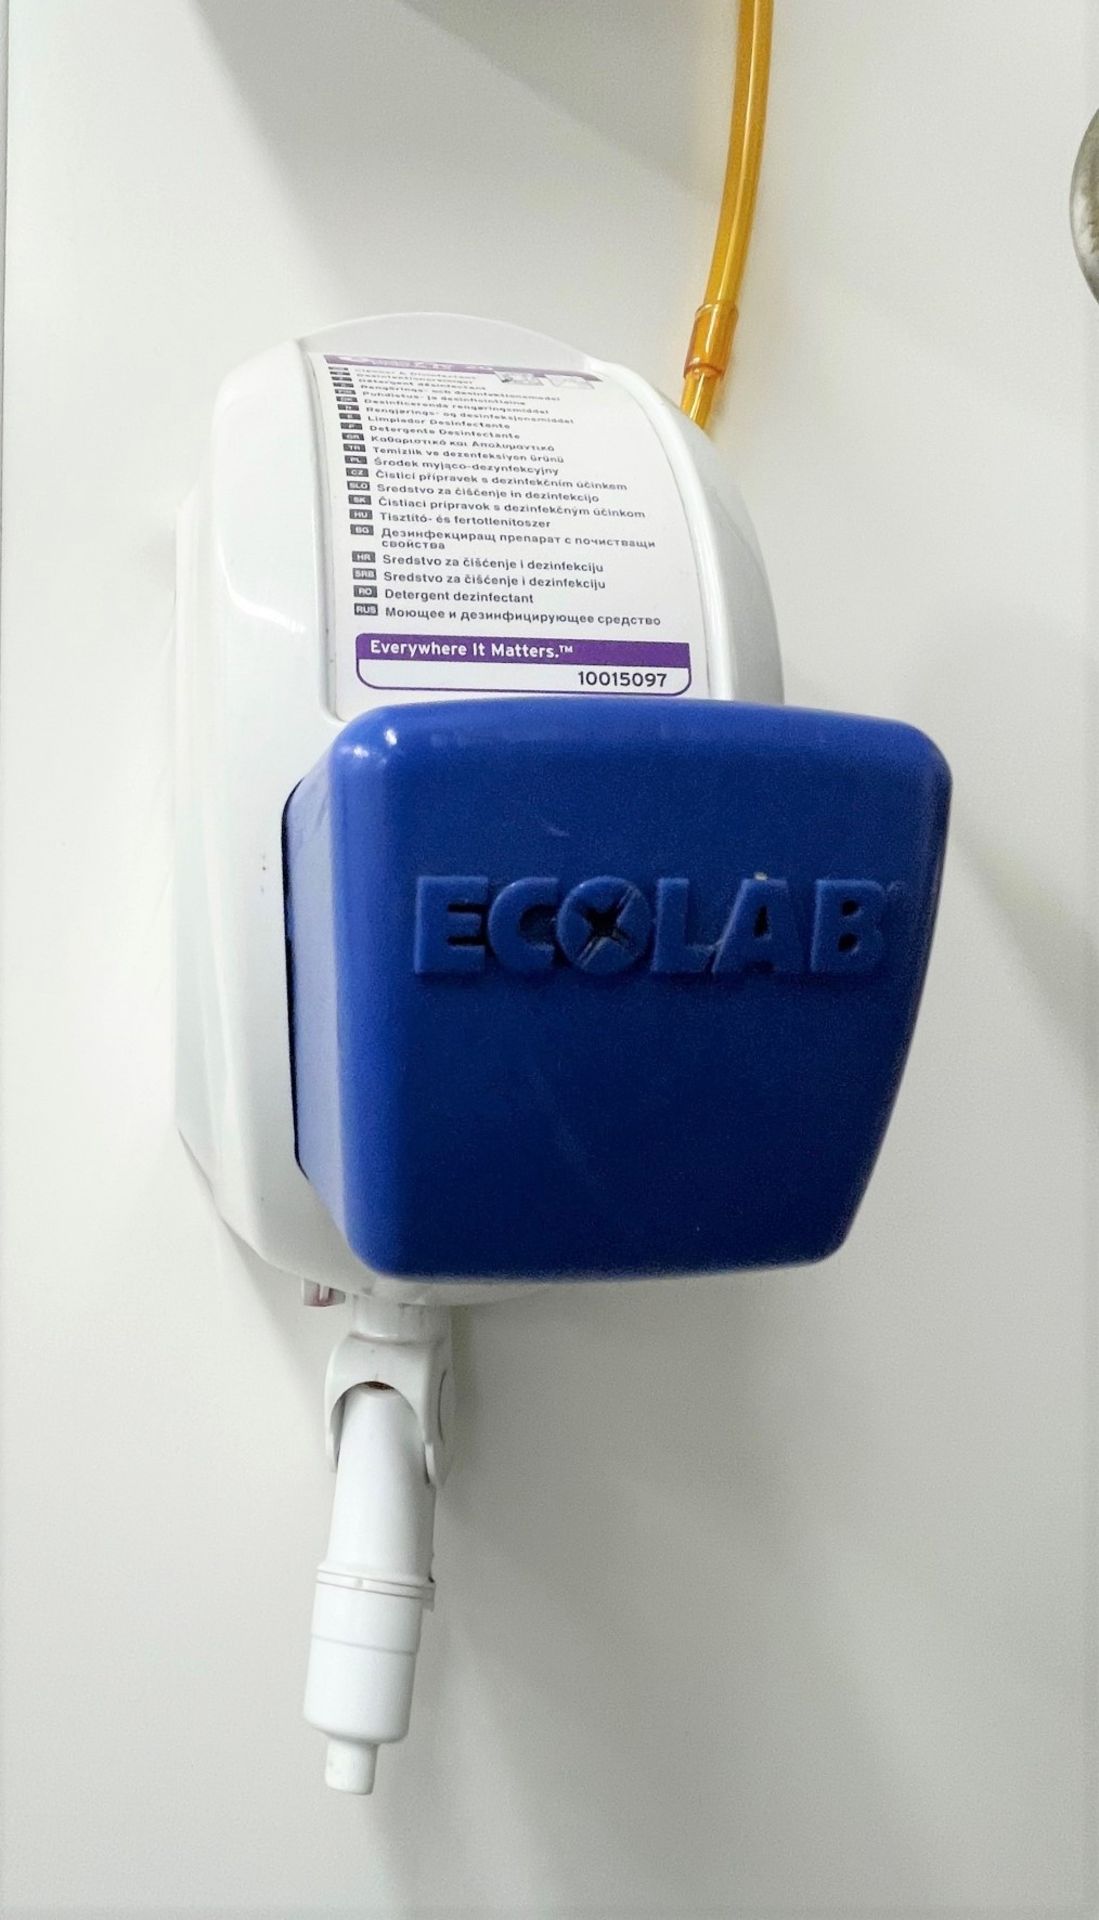 1 x Ecolab Oasis Pro 20 Premium All Purpose Cleaner and Disinfectant System - Image 4 of 4